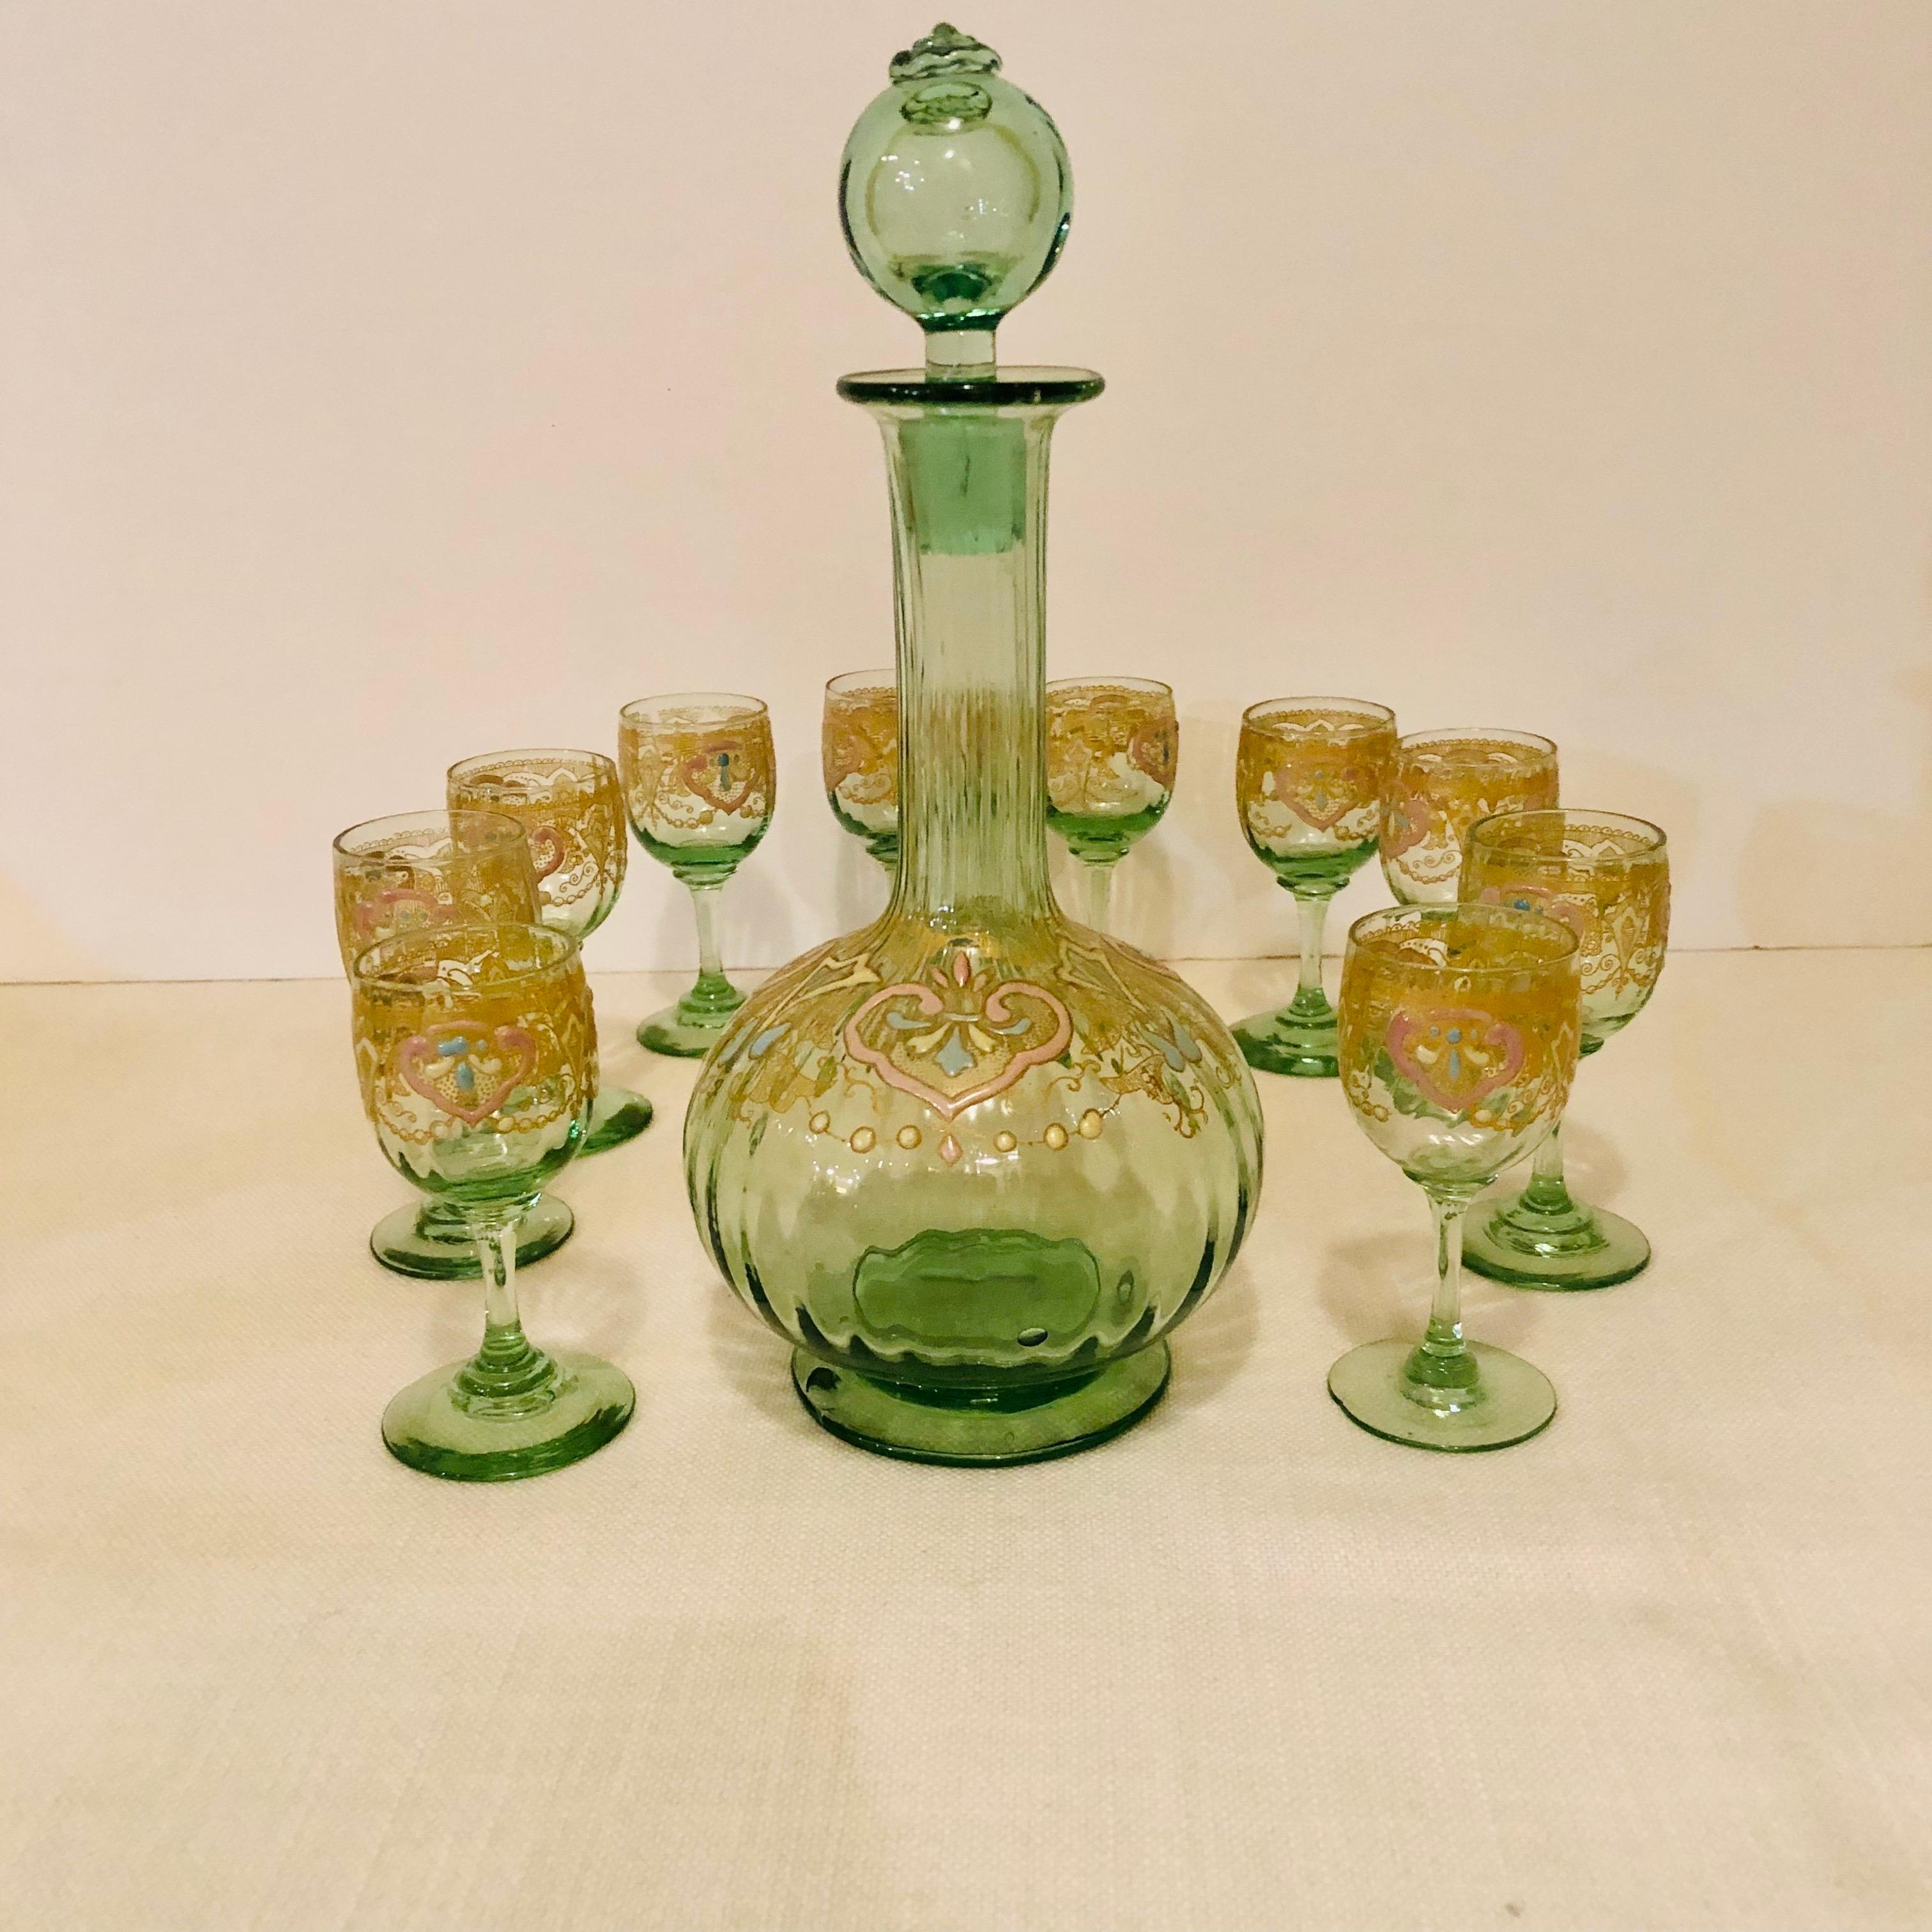 cordial set with decanter